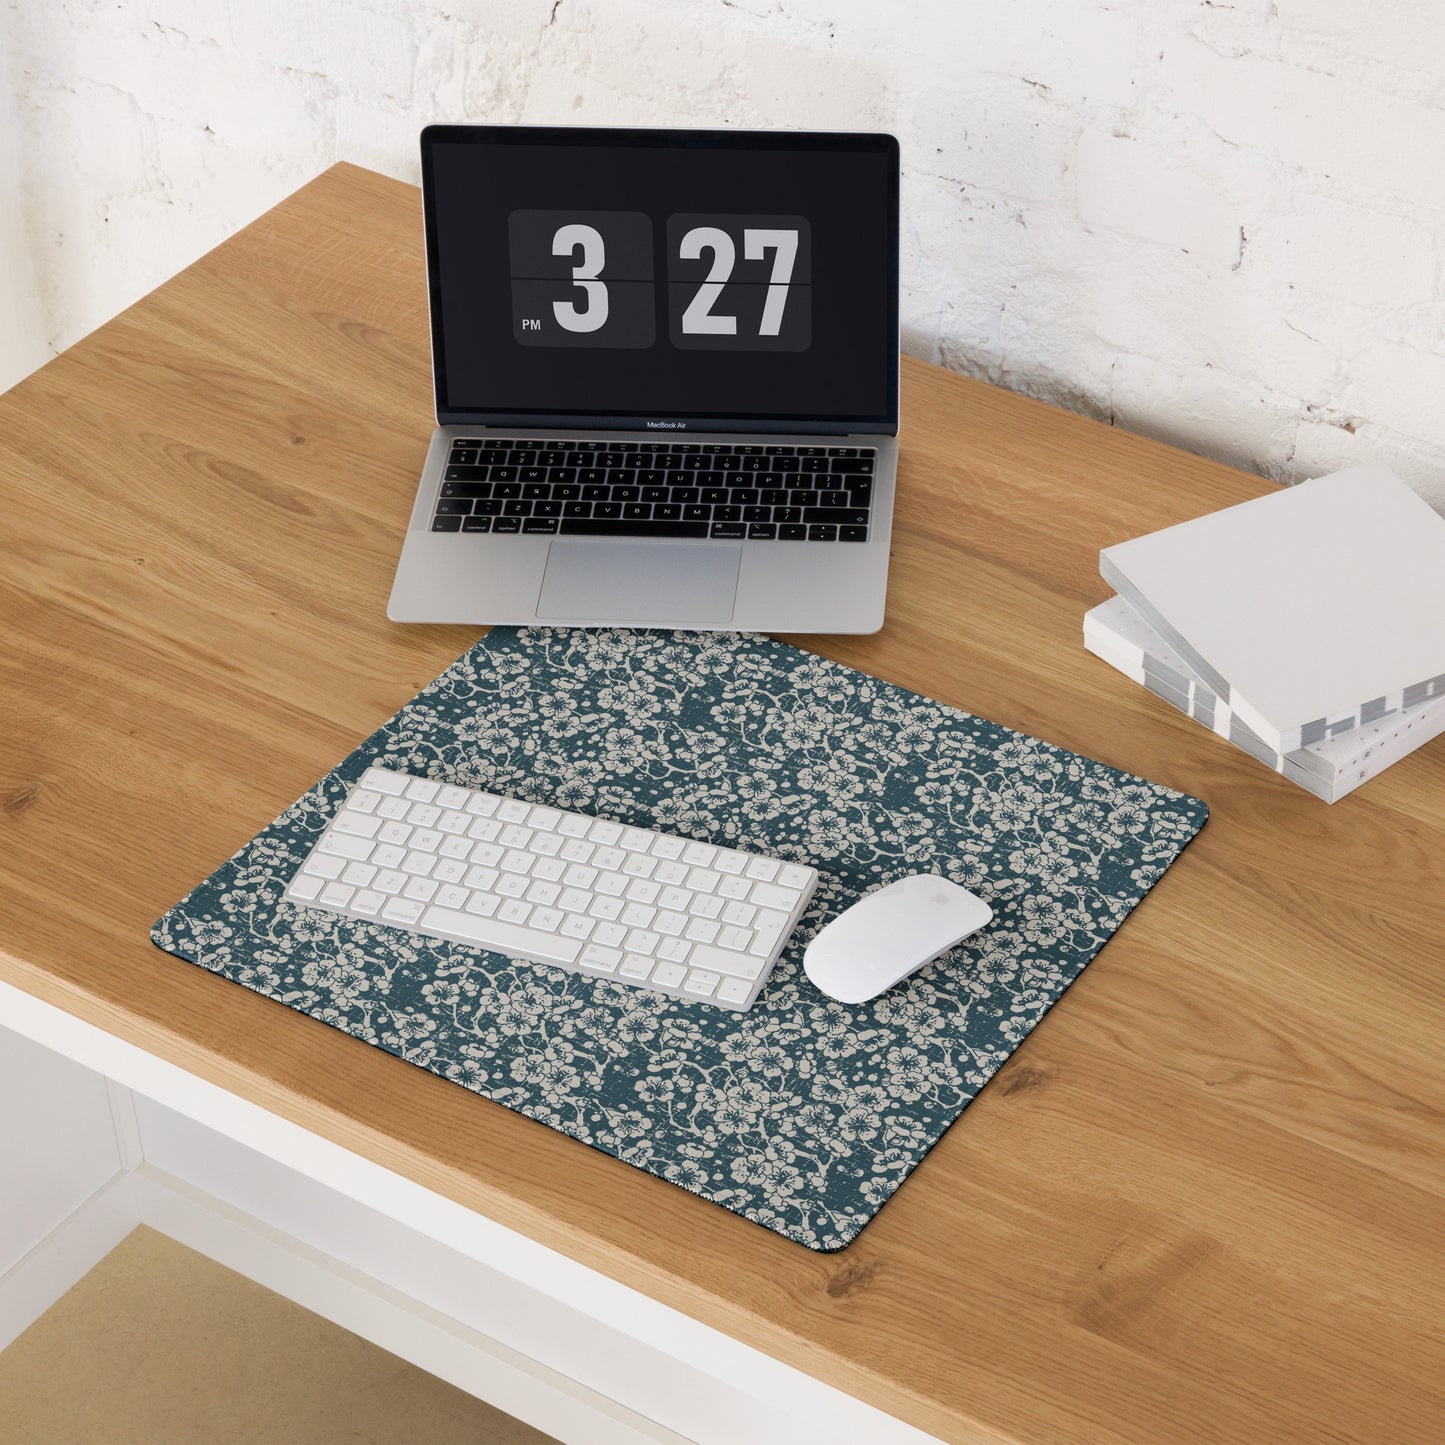 EVERYDAY USE DESK PAD/GAMING MOUSE PAD